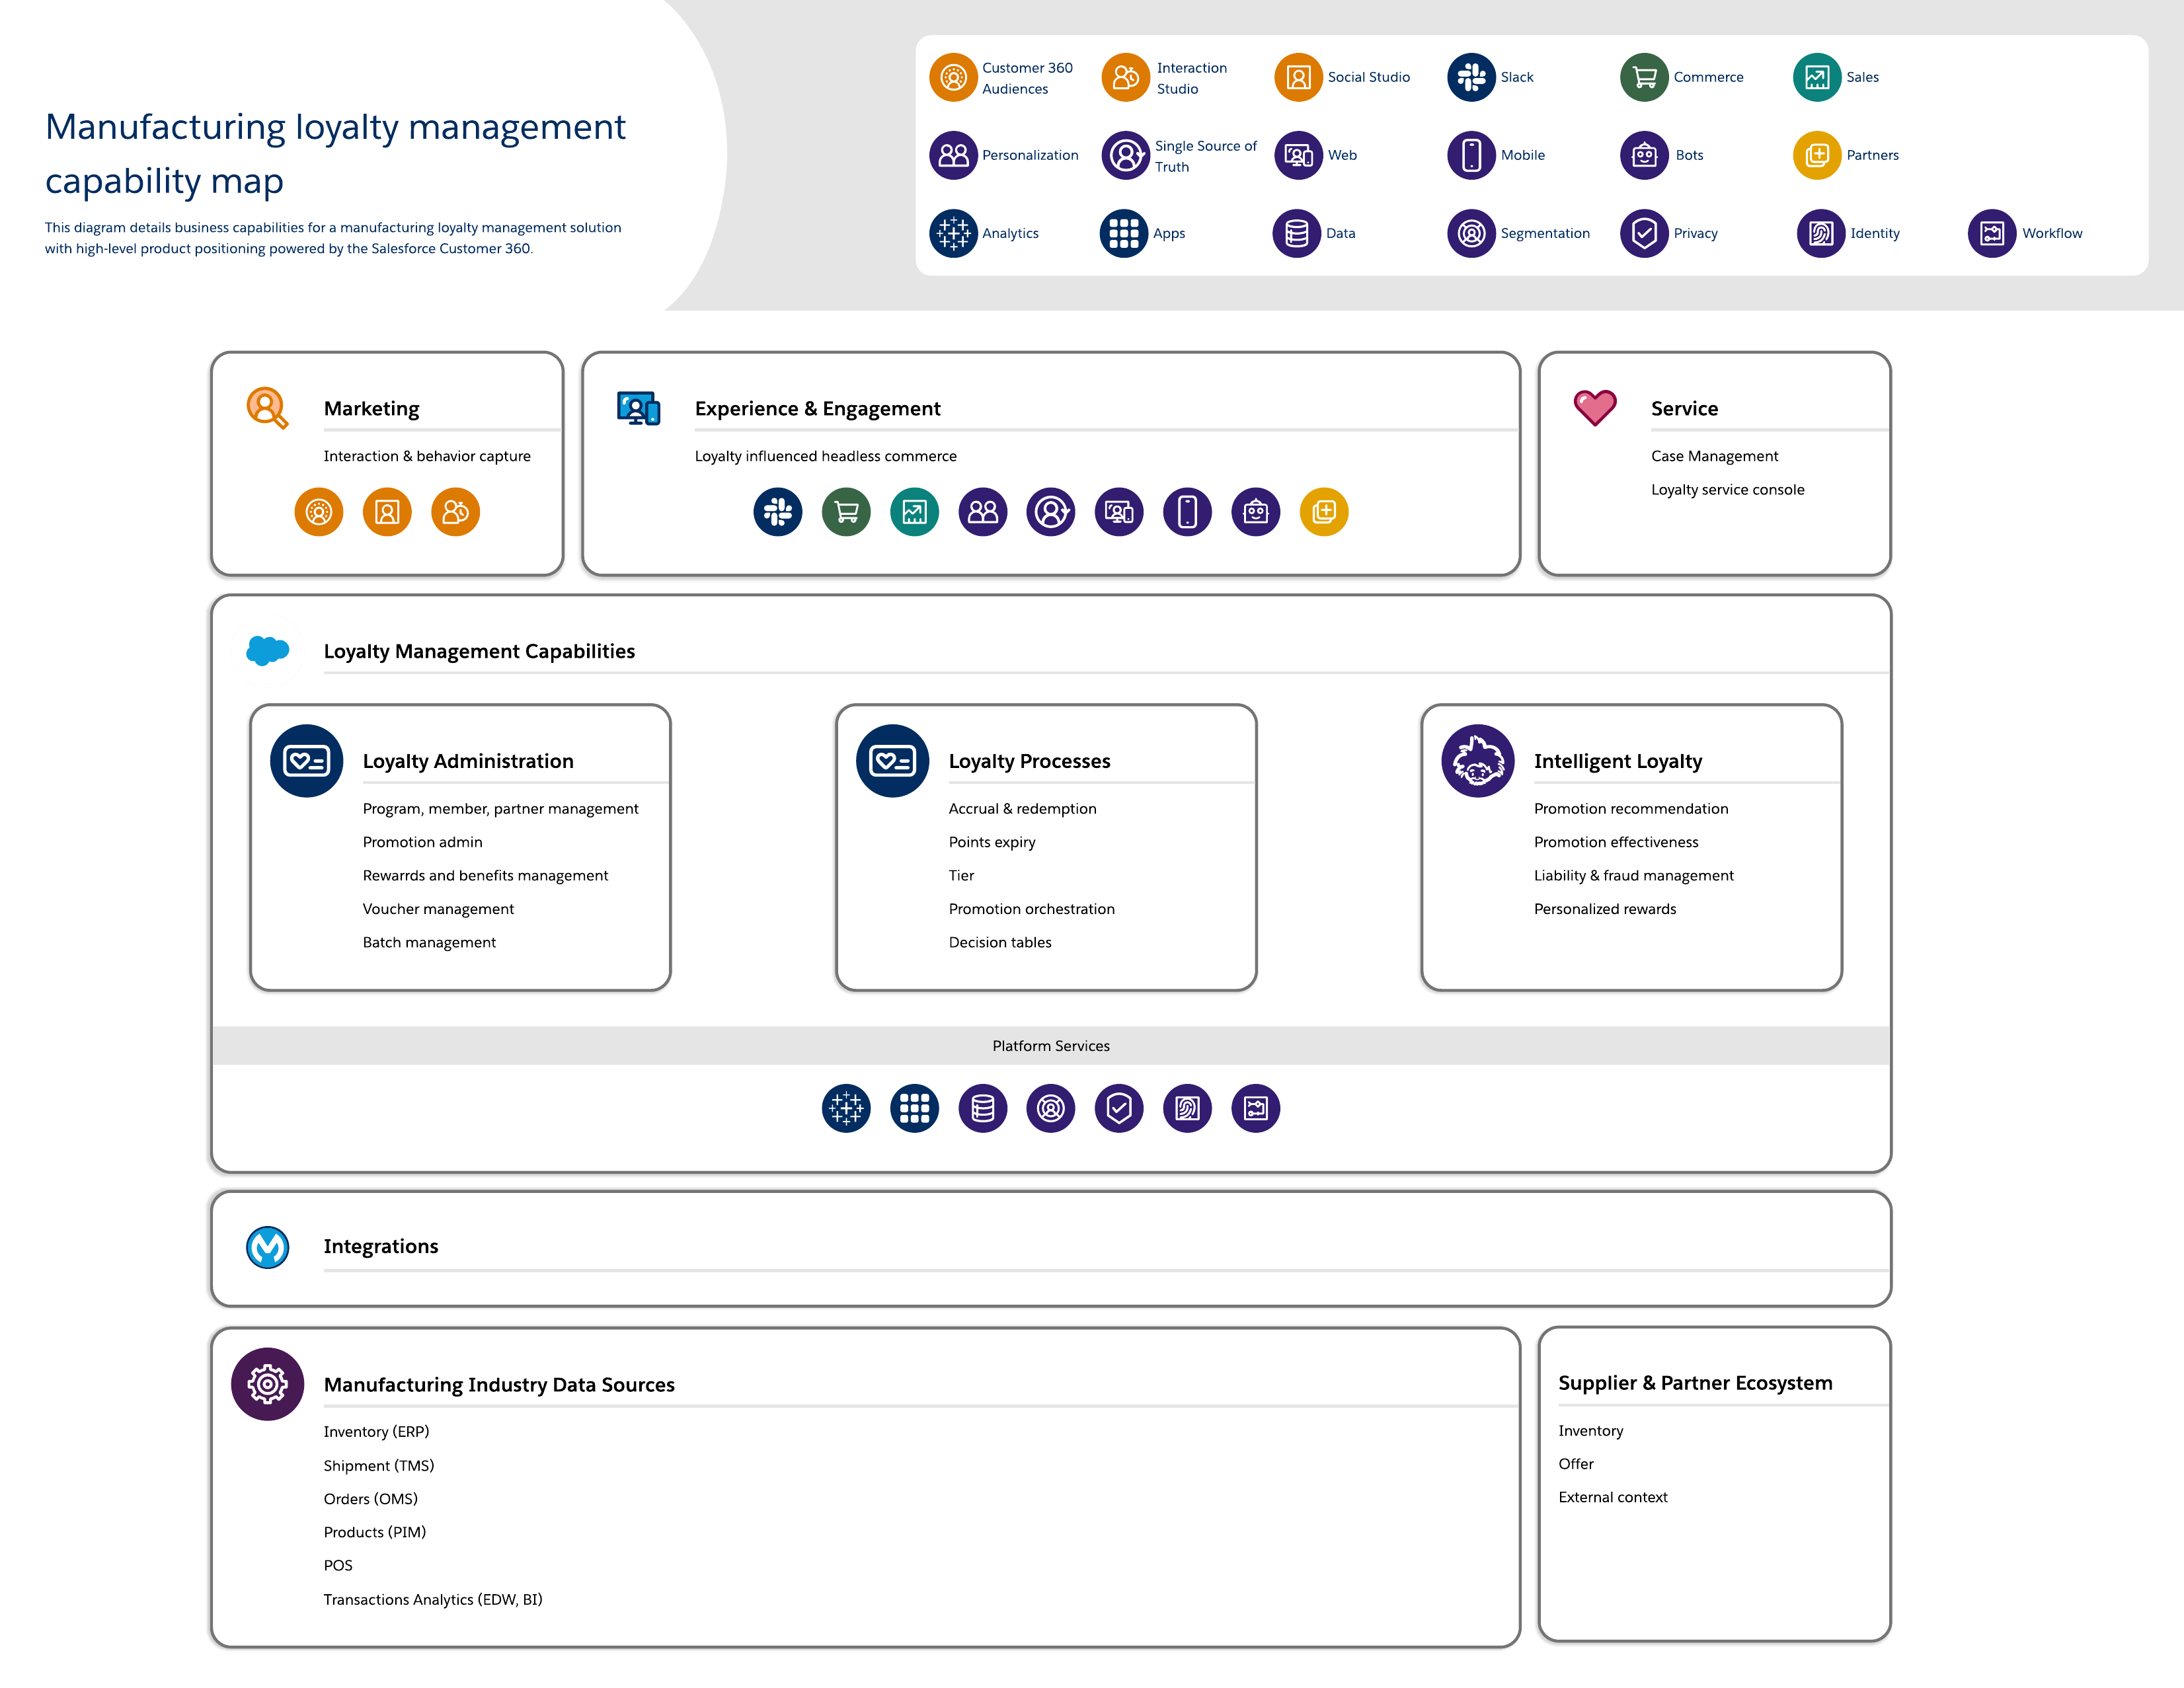 Manufacturing Loyalty Management Capability Map